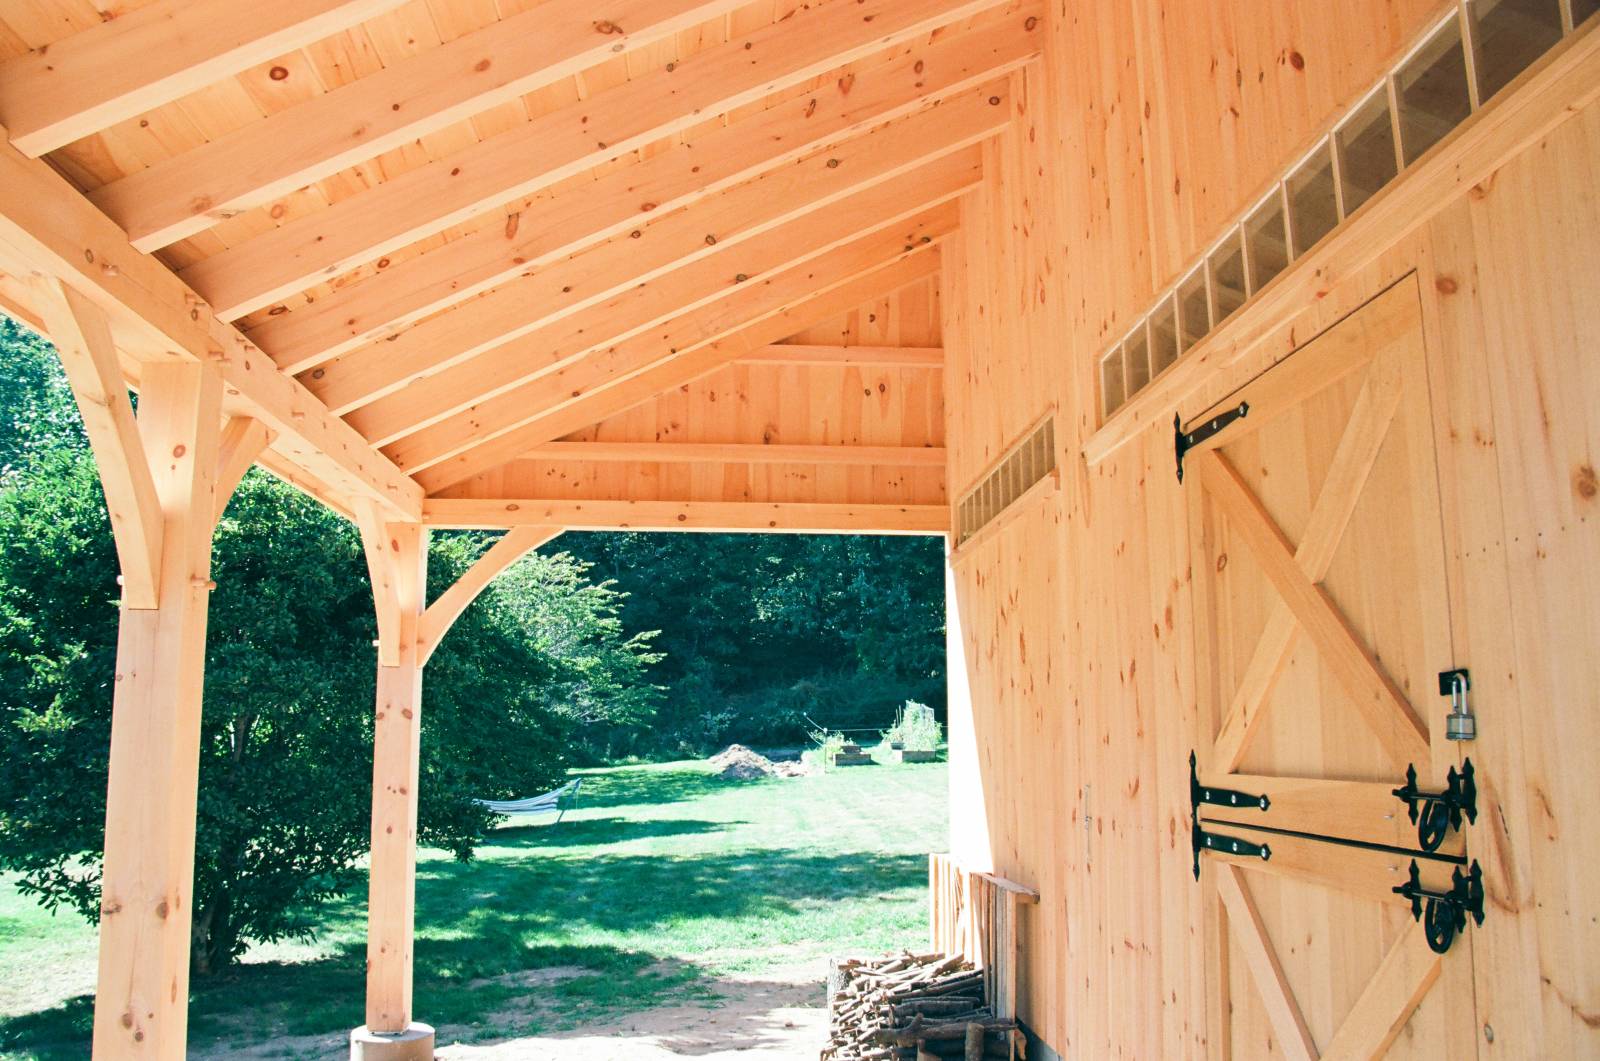 Under the Timber Frame Lean-To Overhang